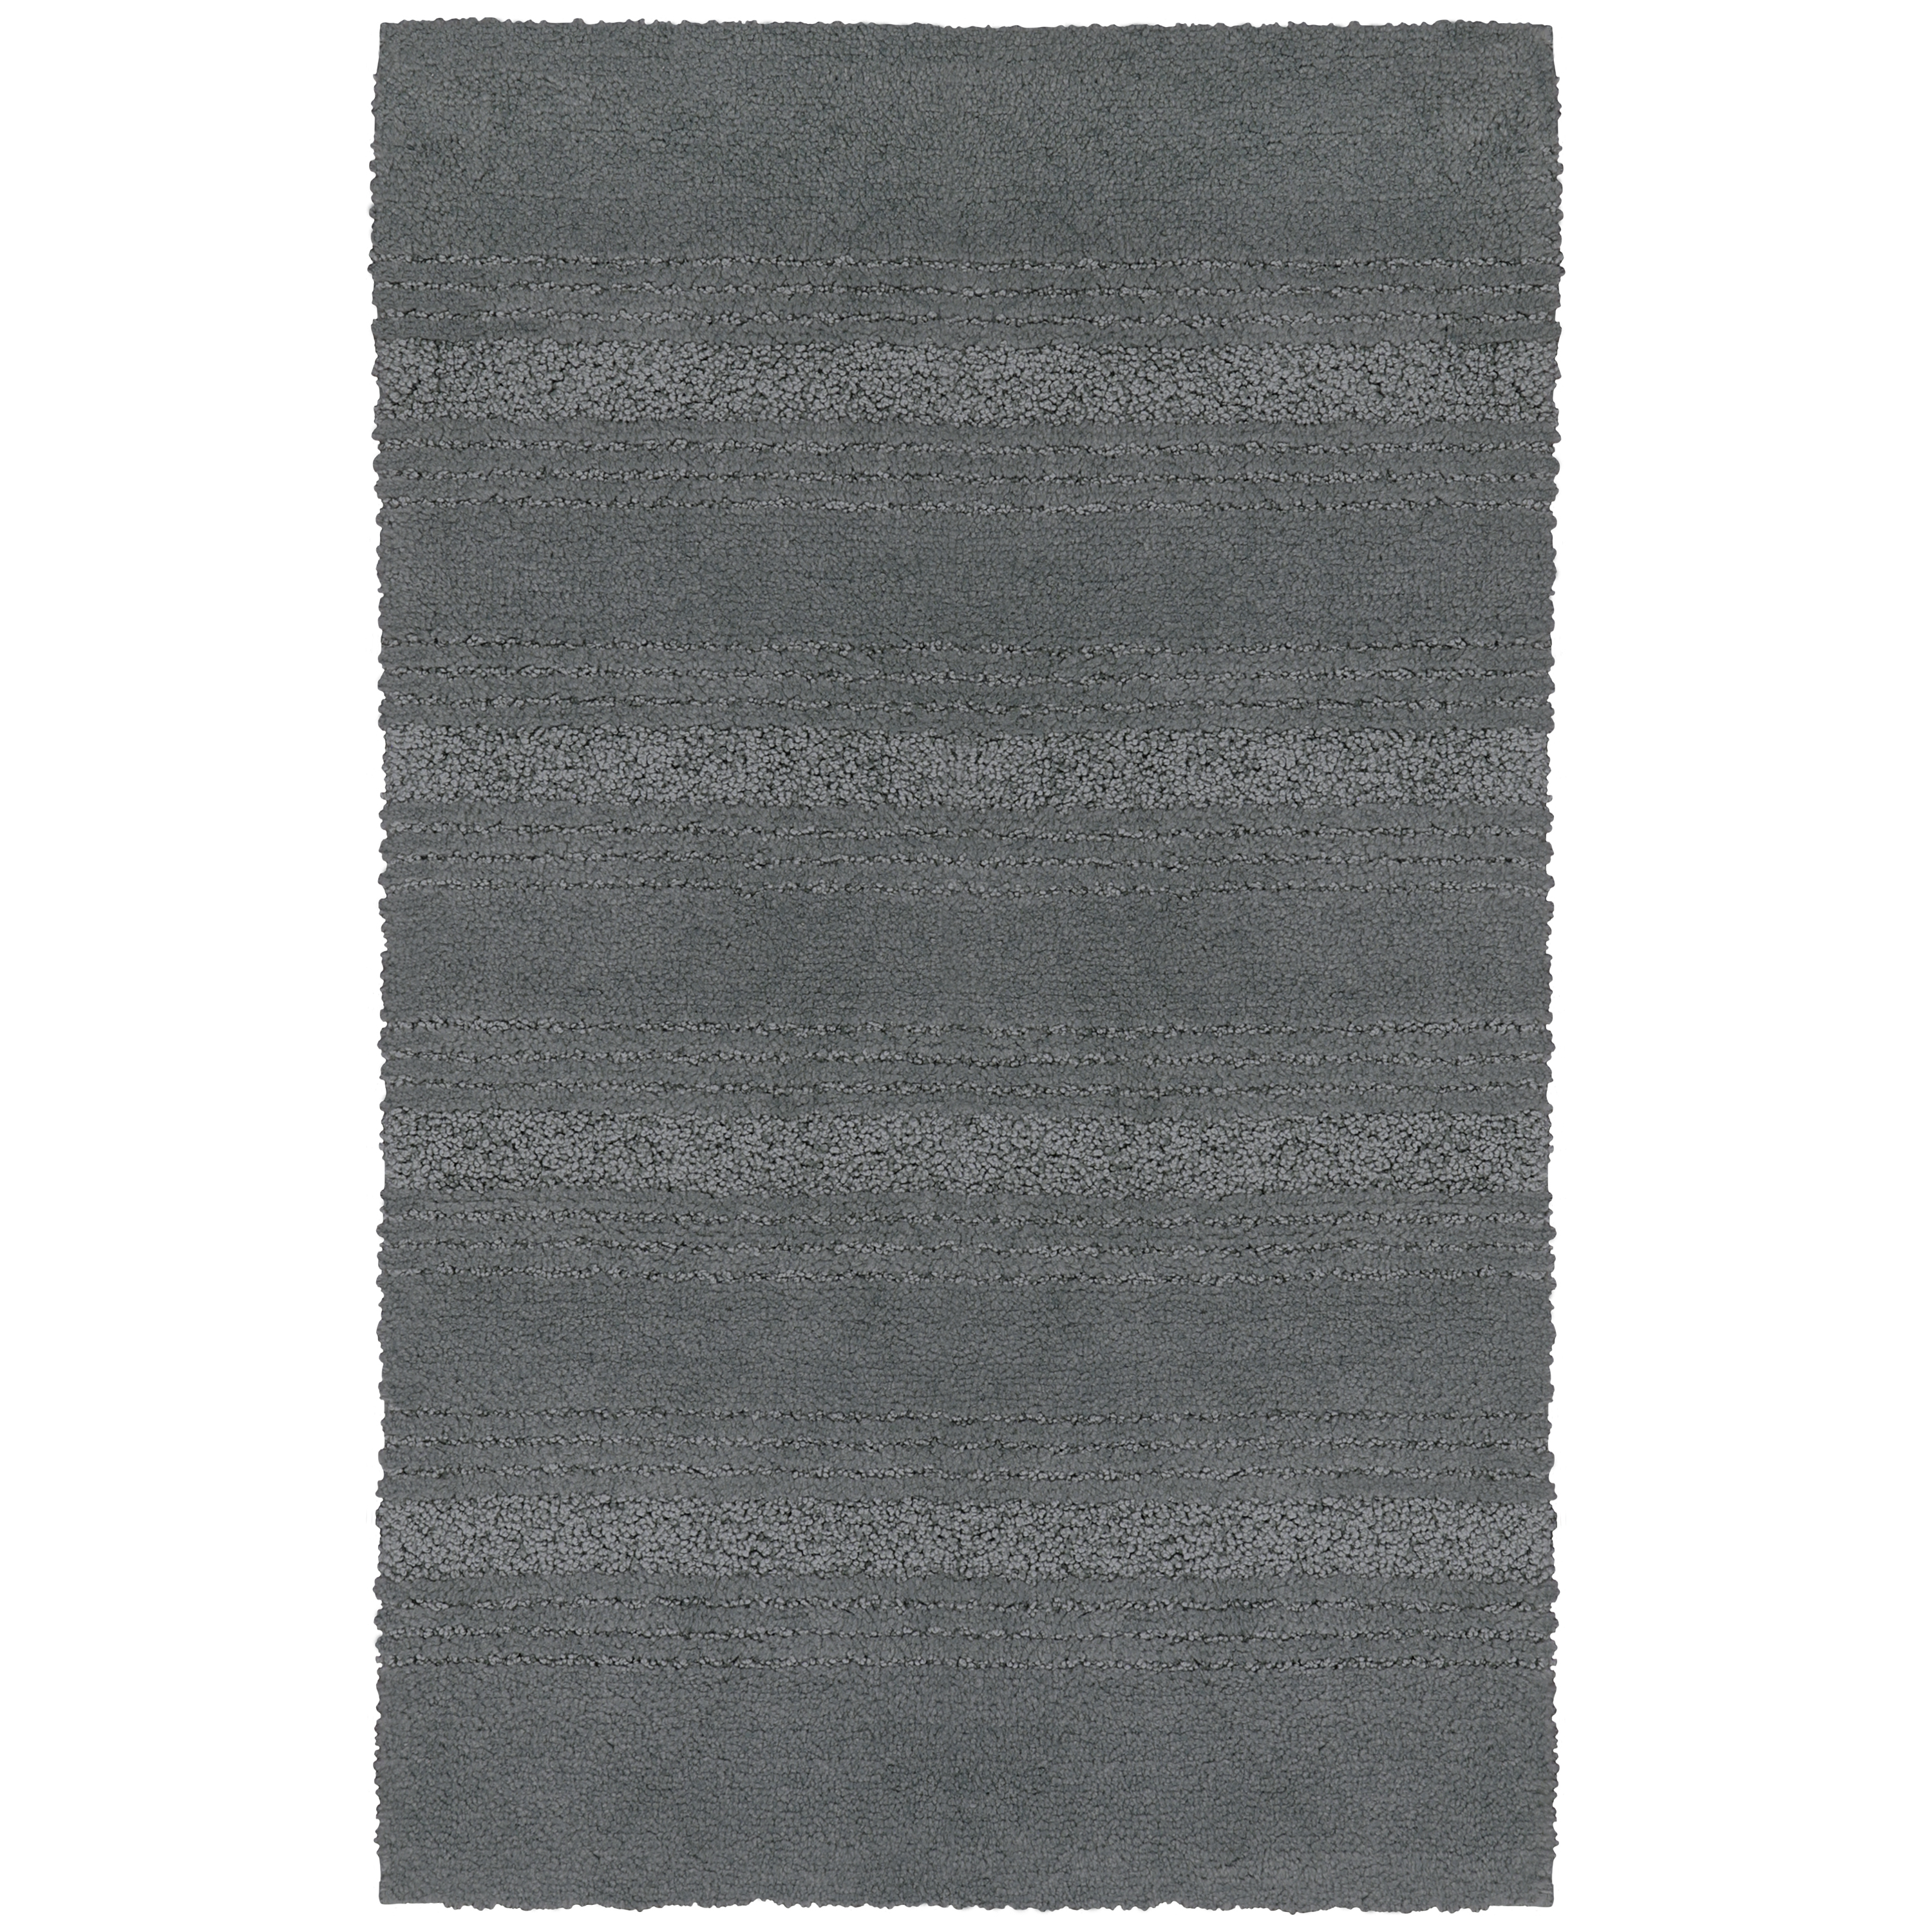 ALAZA My Daily African Women Tribal Stripe Area Rug 3'3 x 5' Living Room Bedroom Kitchen Decorative Lightweight Foam Printed Rug 